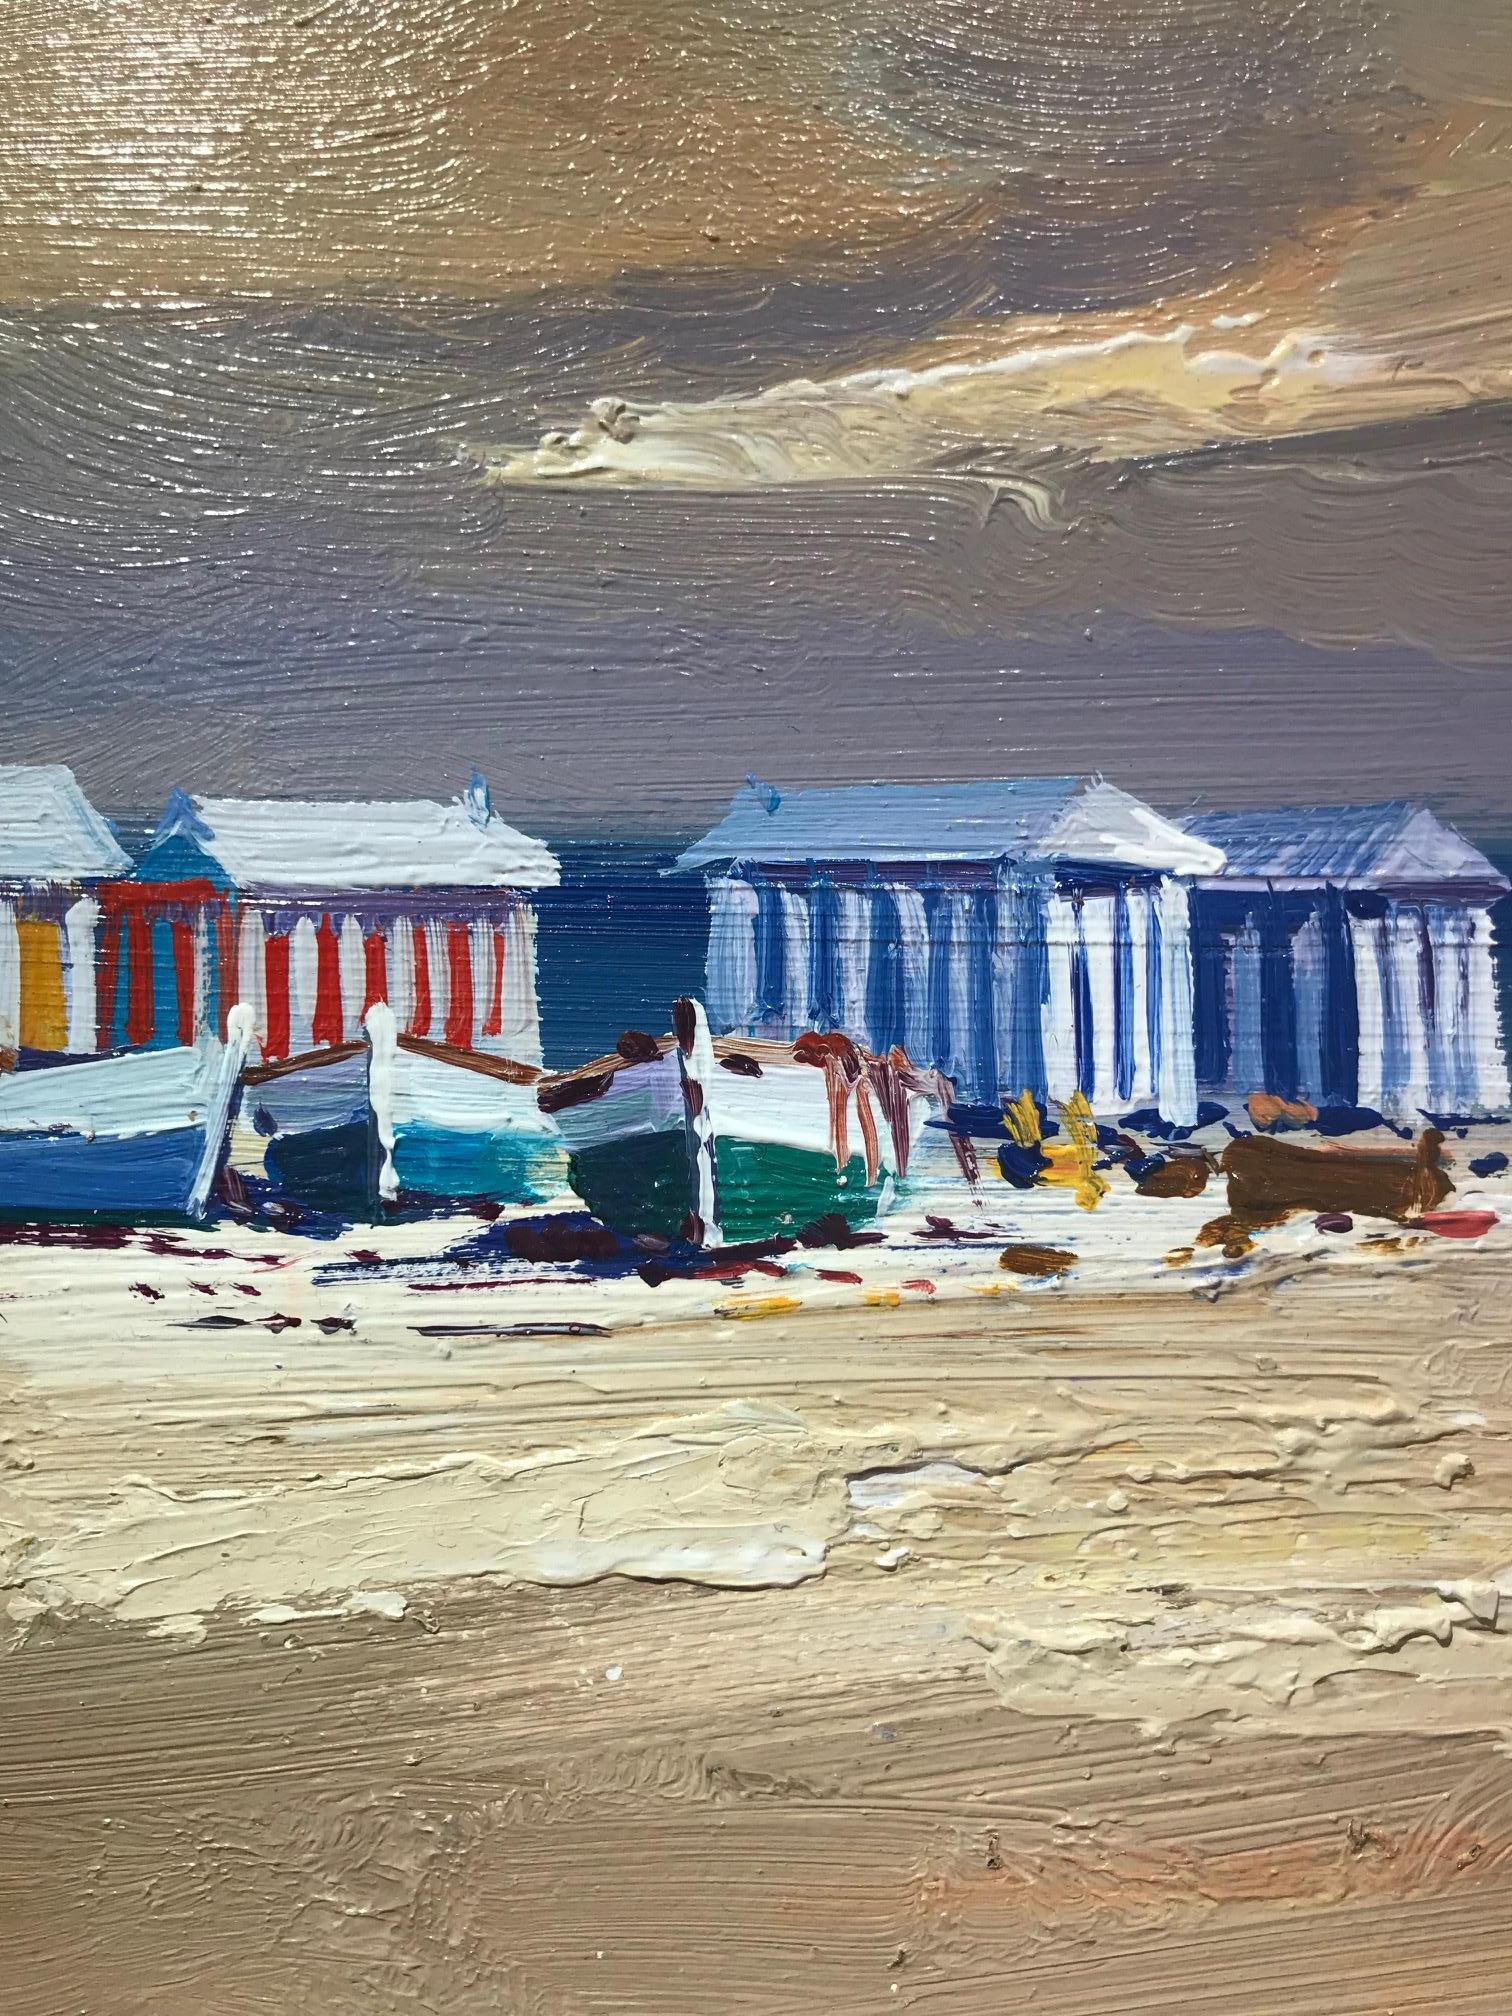 A warm and beautiful contemporary beach scene 'Beach Huts' by E. Martinez. This stunning seascape has a soft and natural colour palette, pale blues and earthy cool tones are subtle and mellow. Interesting textures create a warm and balanced